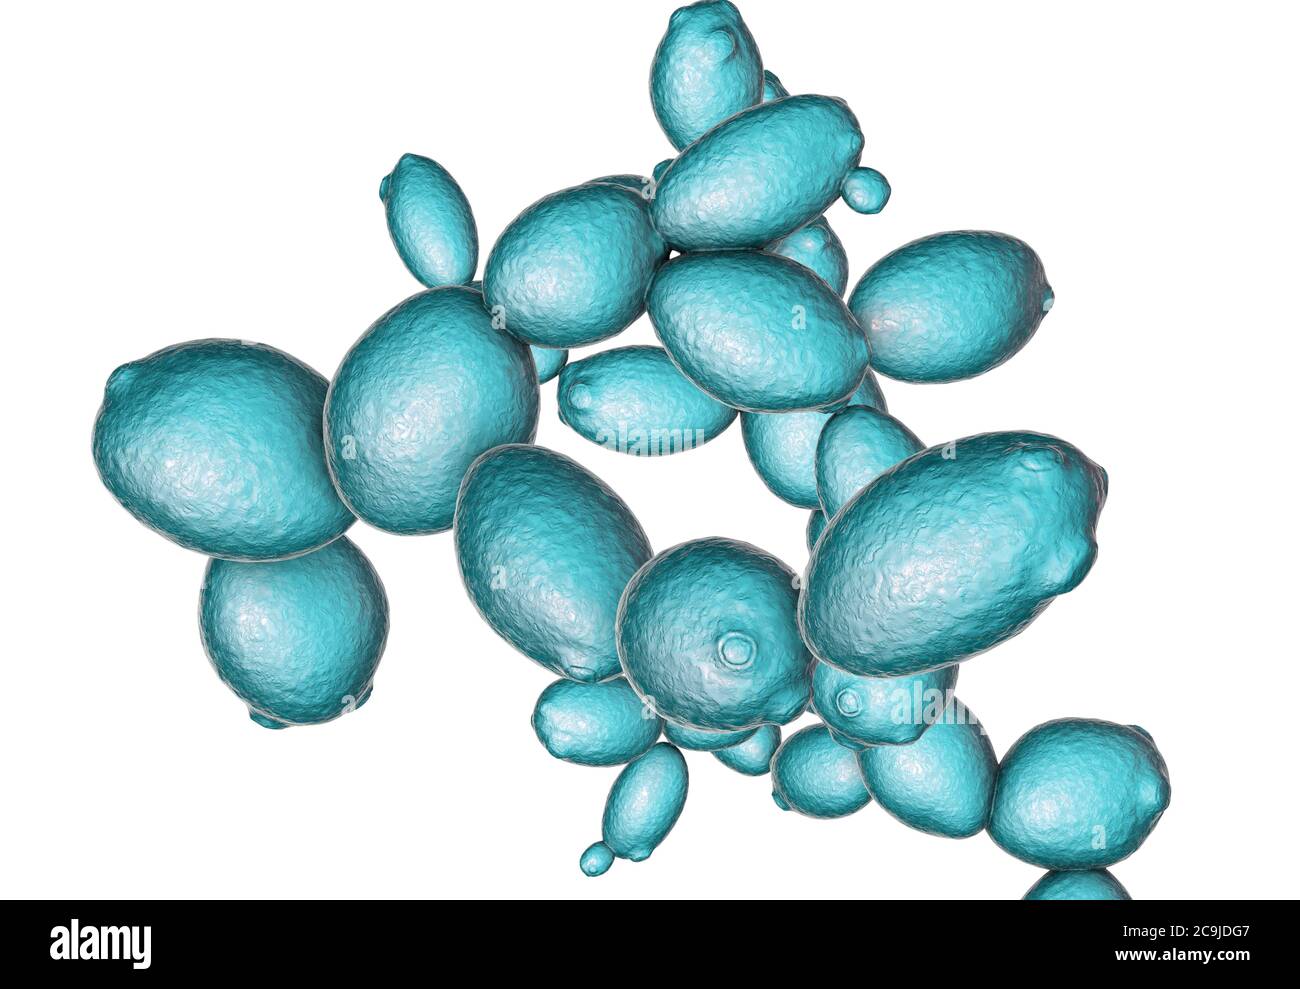 Yeast cells. Computer illustration of budding yeast cells (Saccharomyces cerevisiae). Known as baker's or brewer's yeast, this fungus consists of sing Stock Photo